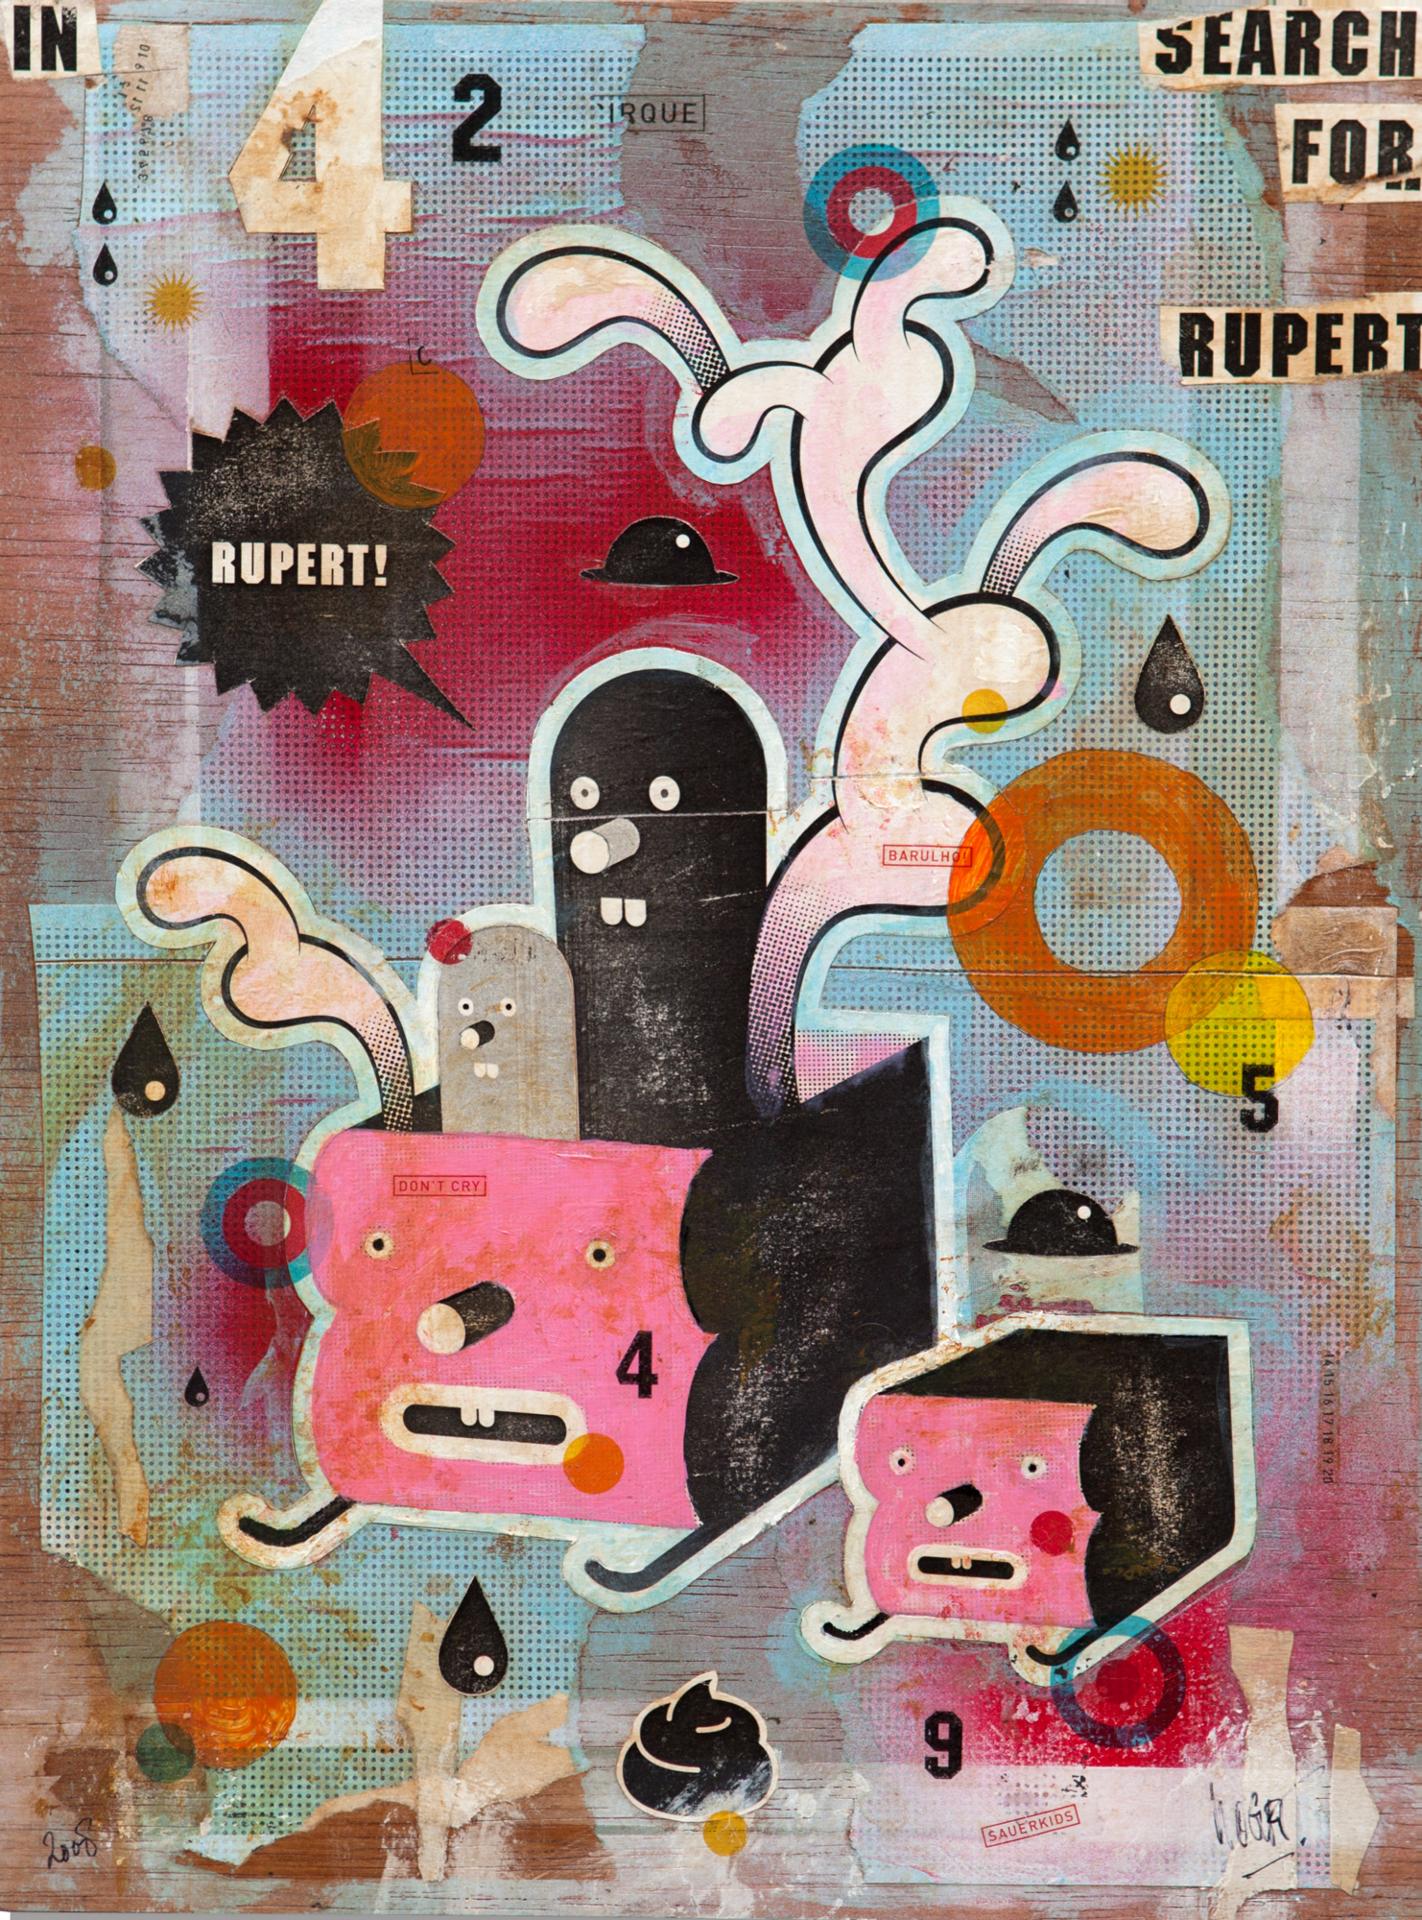 Sauer Kids - In Search For Rupert, 2008